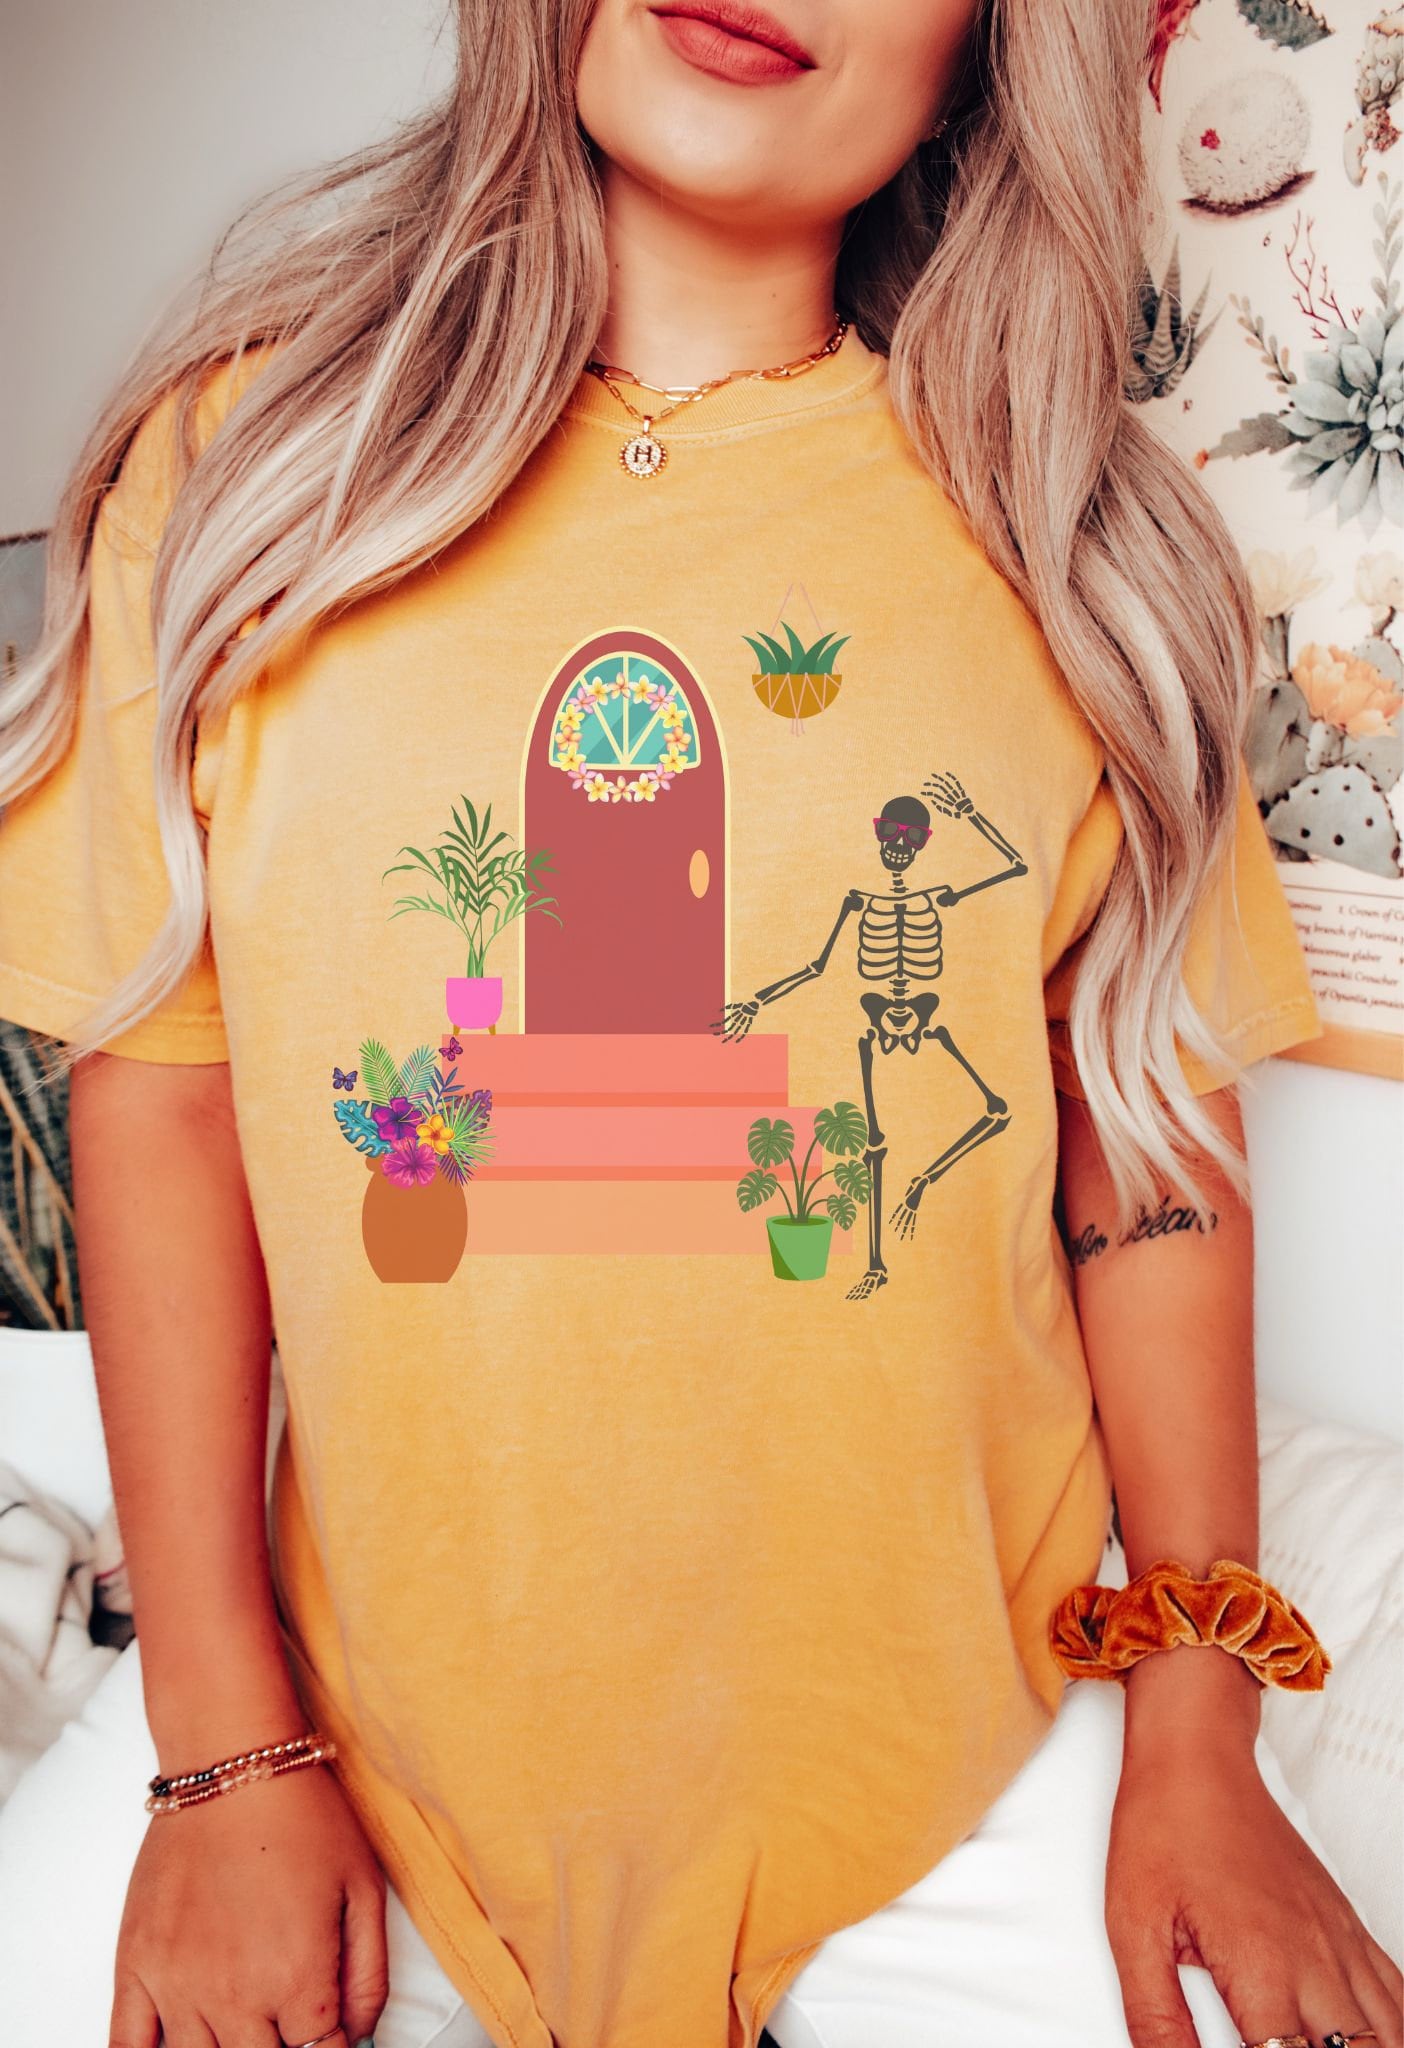 A woman wearing a cute, vintage mustard colored shirt with a skeleton wearing red sunglasses walking out the front door of their house. The front stoop has colorful plants and flowers and the front door has a pink and yellow flower wreath hanging.